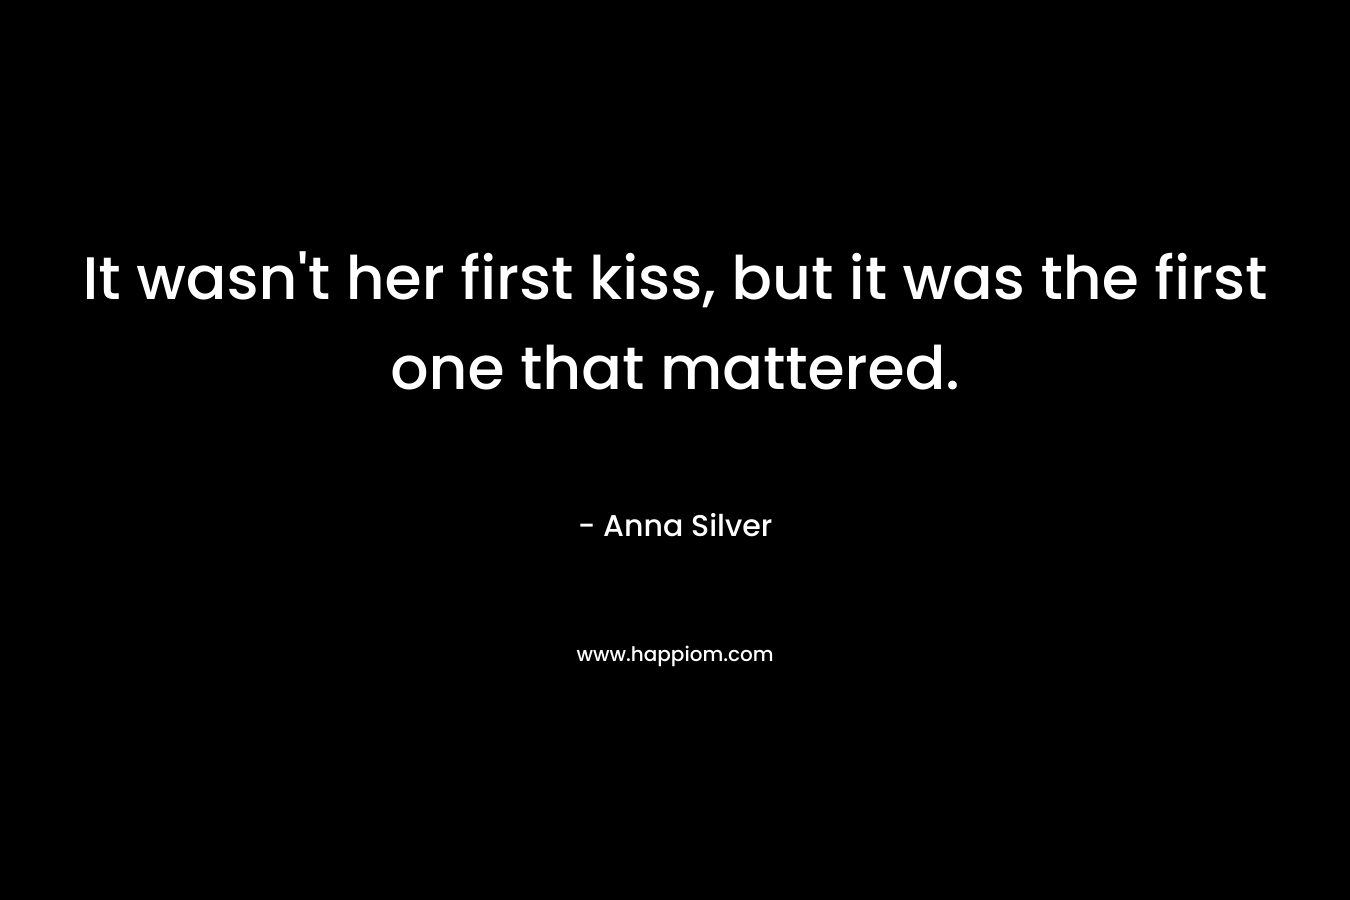 It wasn't her first kiss, but it was the first one that mattered.